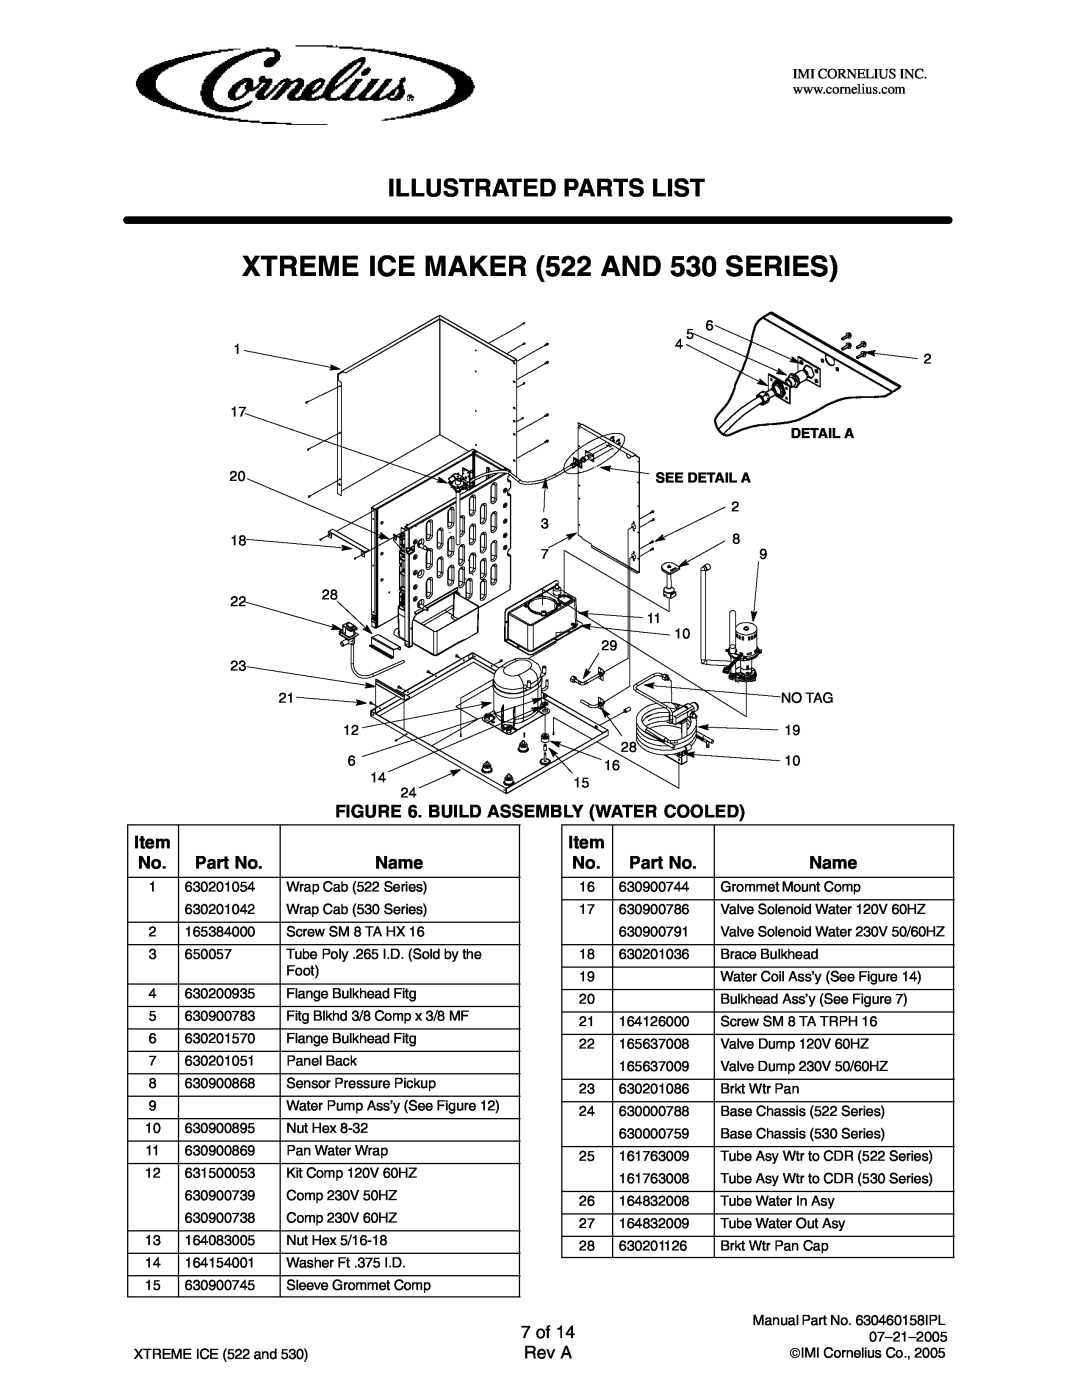 Cornelius 631805006 Build Assembly Water Cooled, 7 of, XTREME ICE MAKER 522 AND 530 SERIES, Illustrated Parts List, Name 